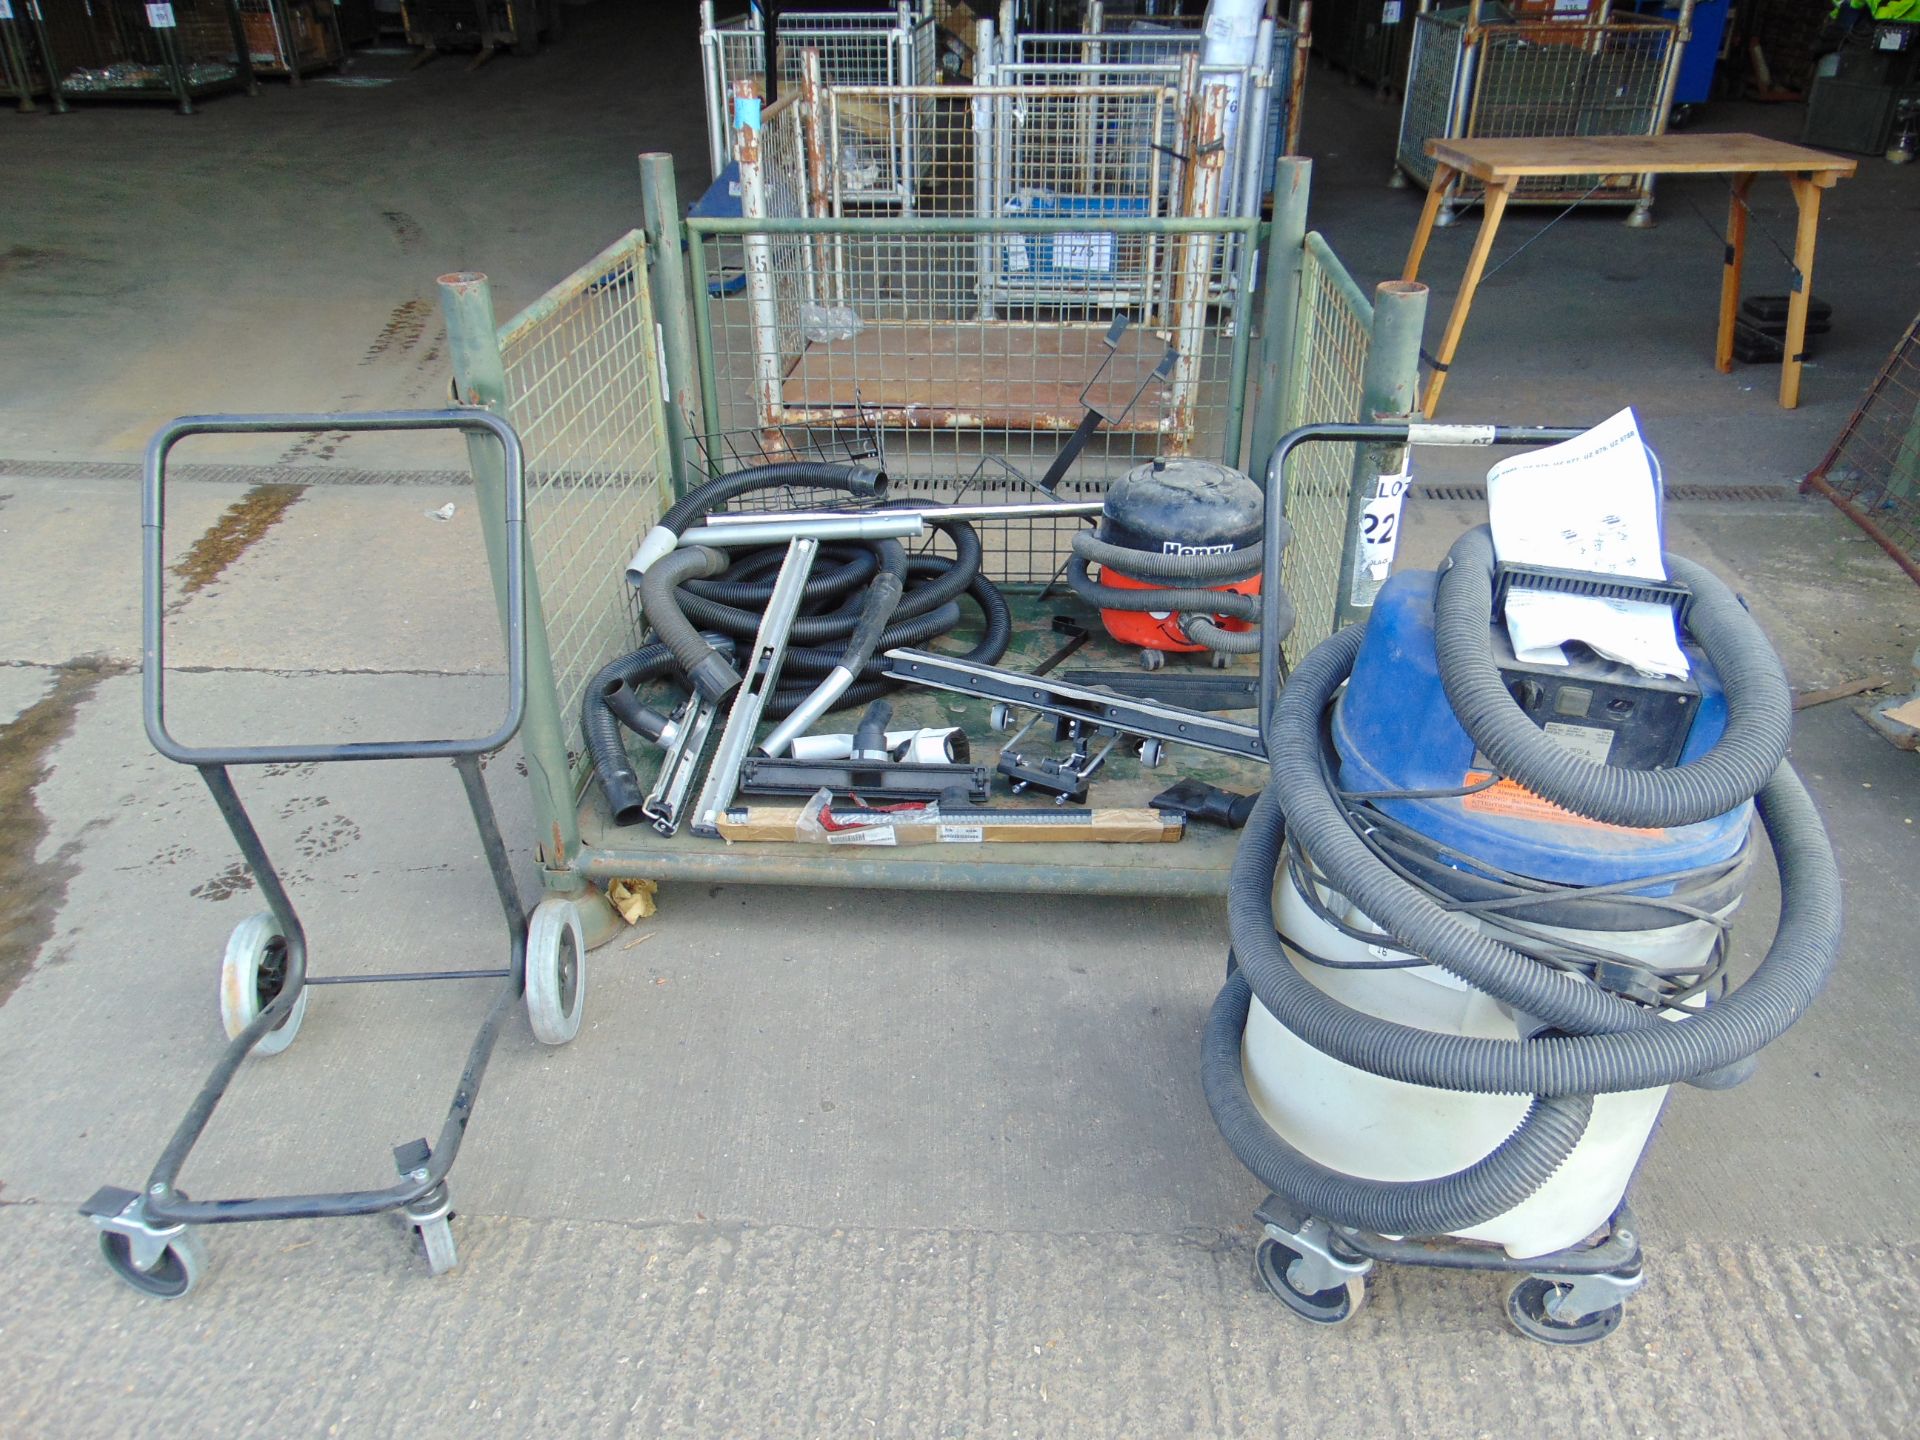 1 x Euroclean Shop Vacuum & Henry Vacuum w/ Trolley, Piping, Various Attachments etc.